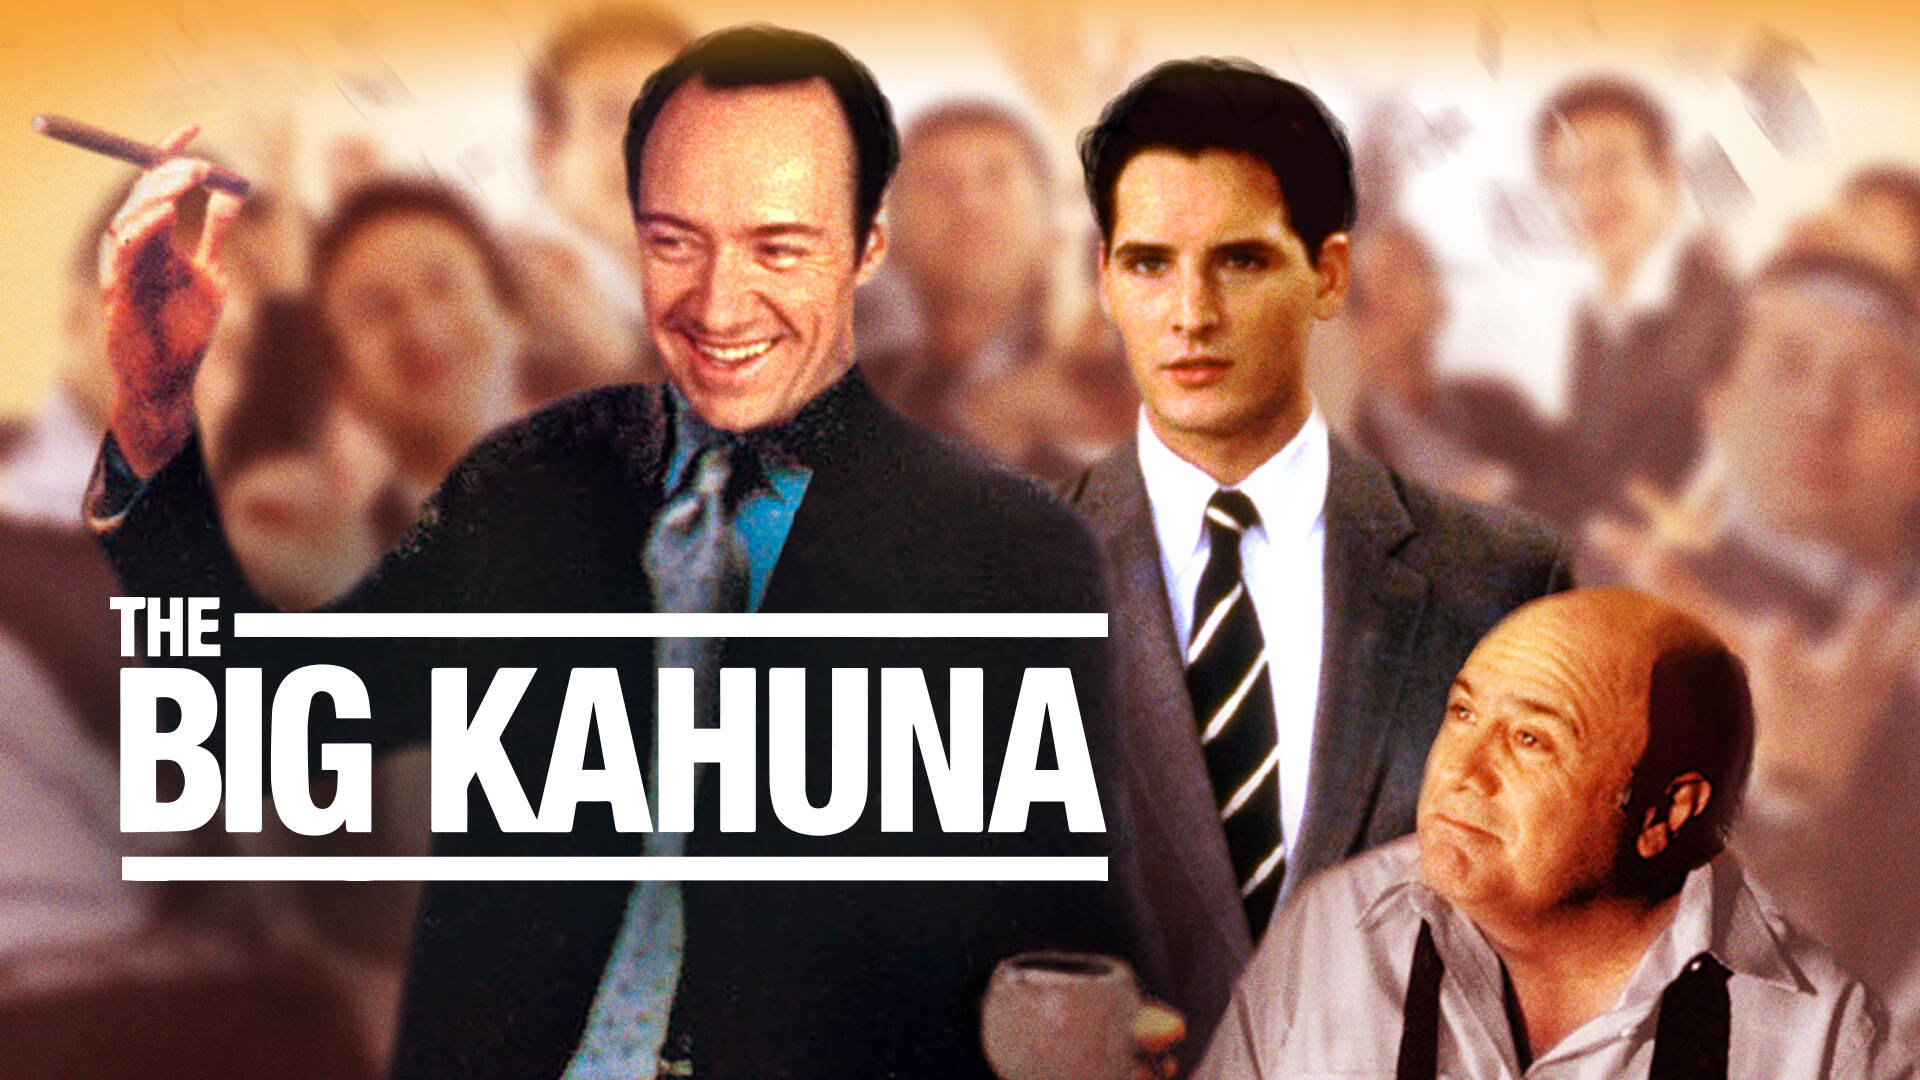 38-facts-about-the-movie-the-big-kahuna